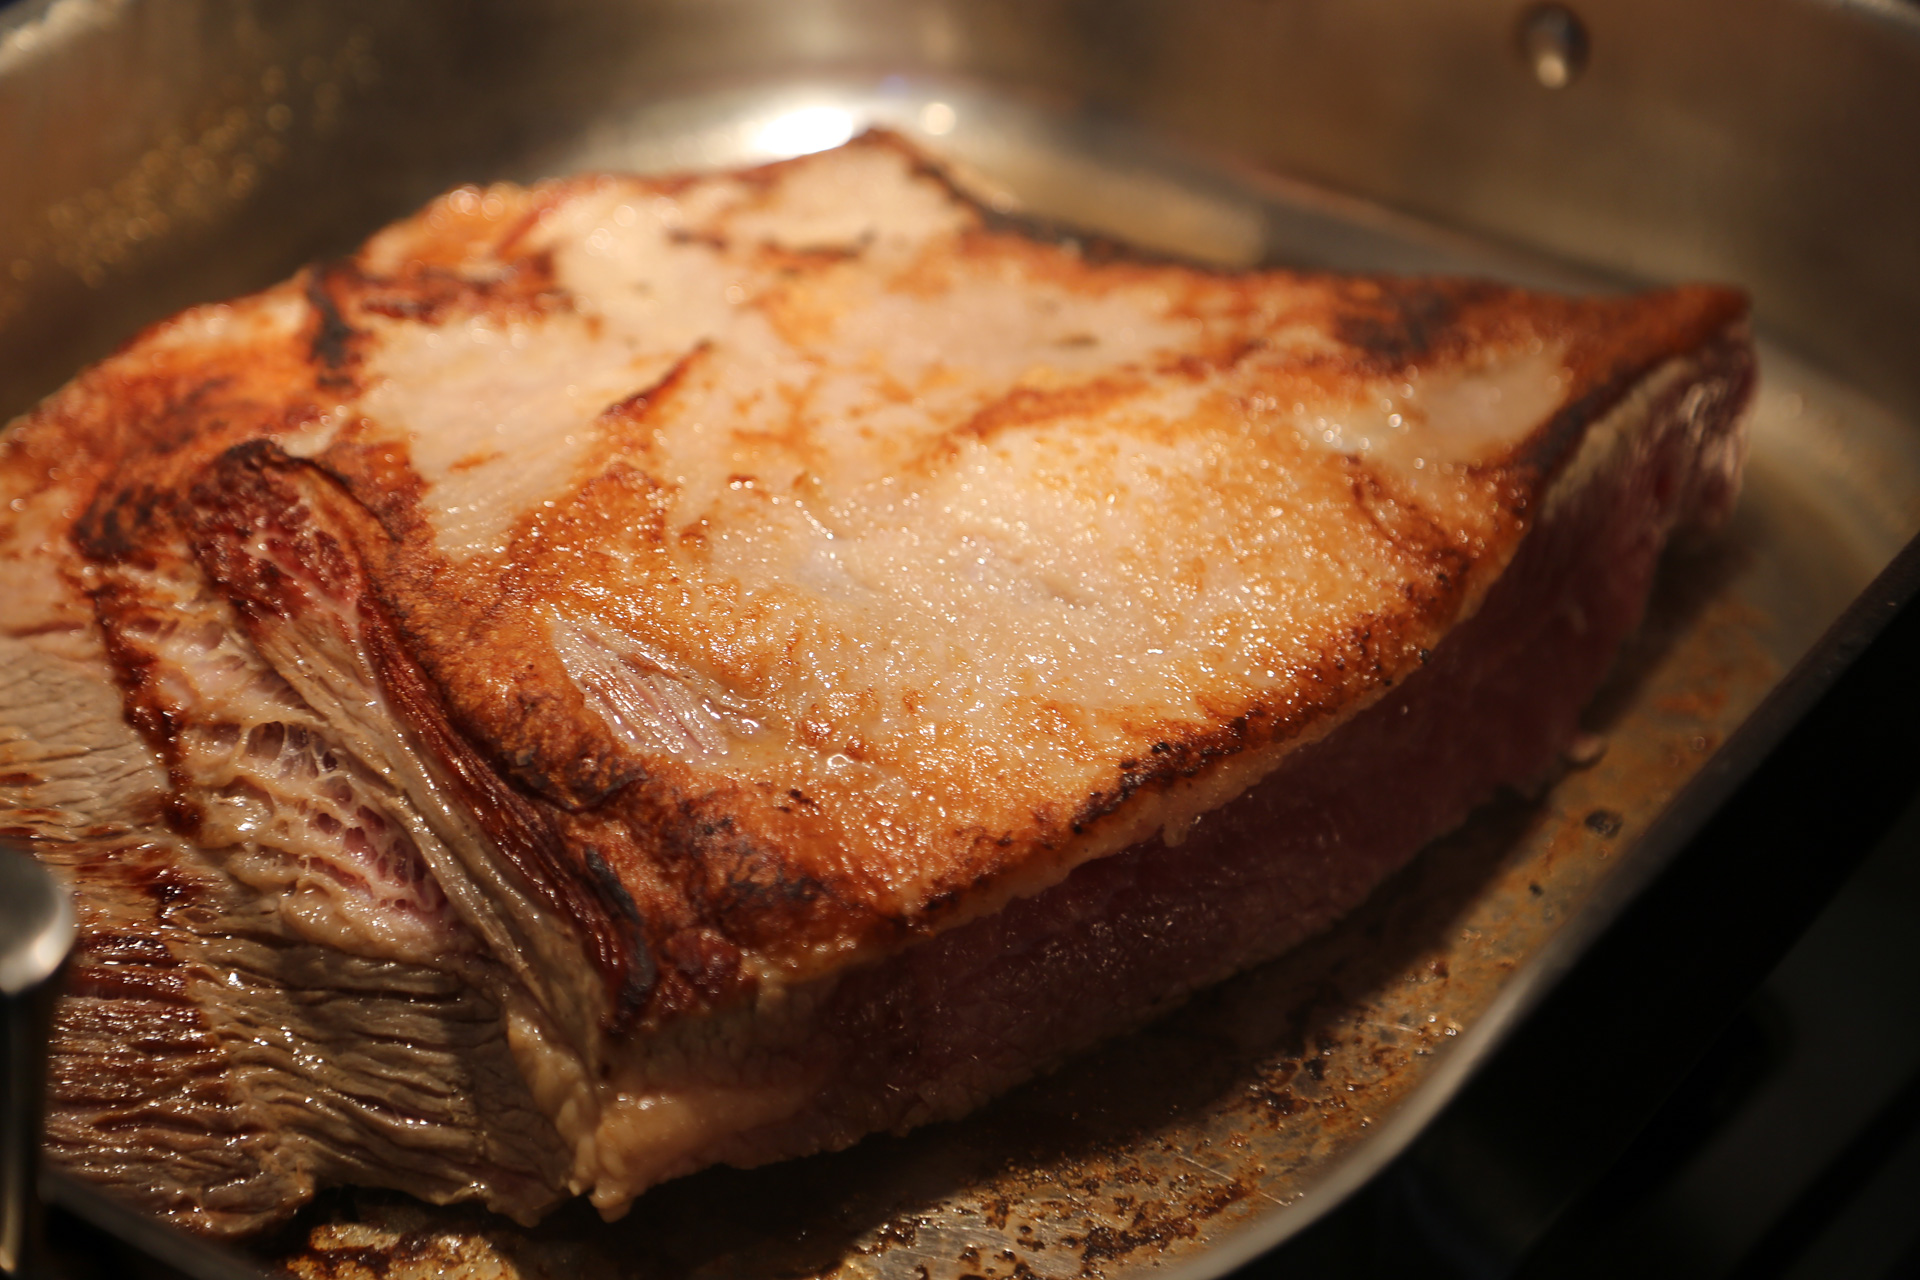 Sear until well-browned on both sides, turning once, about 10 minutes total.